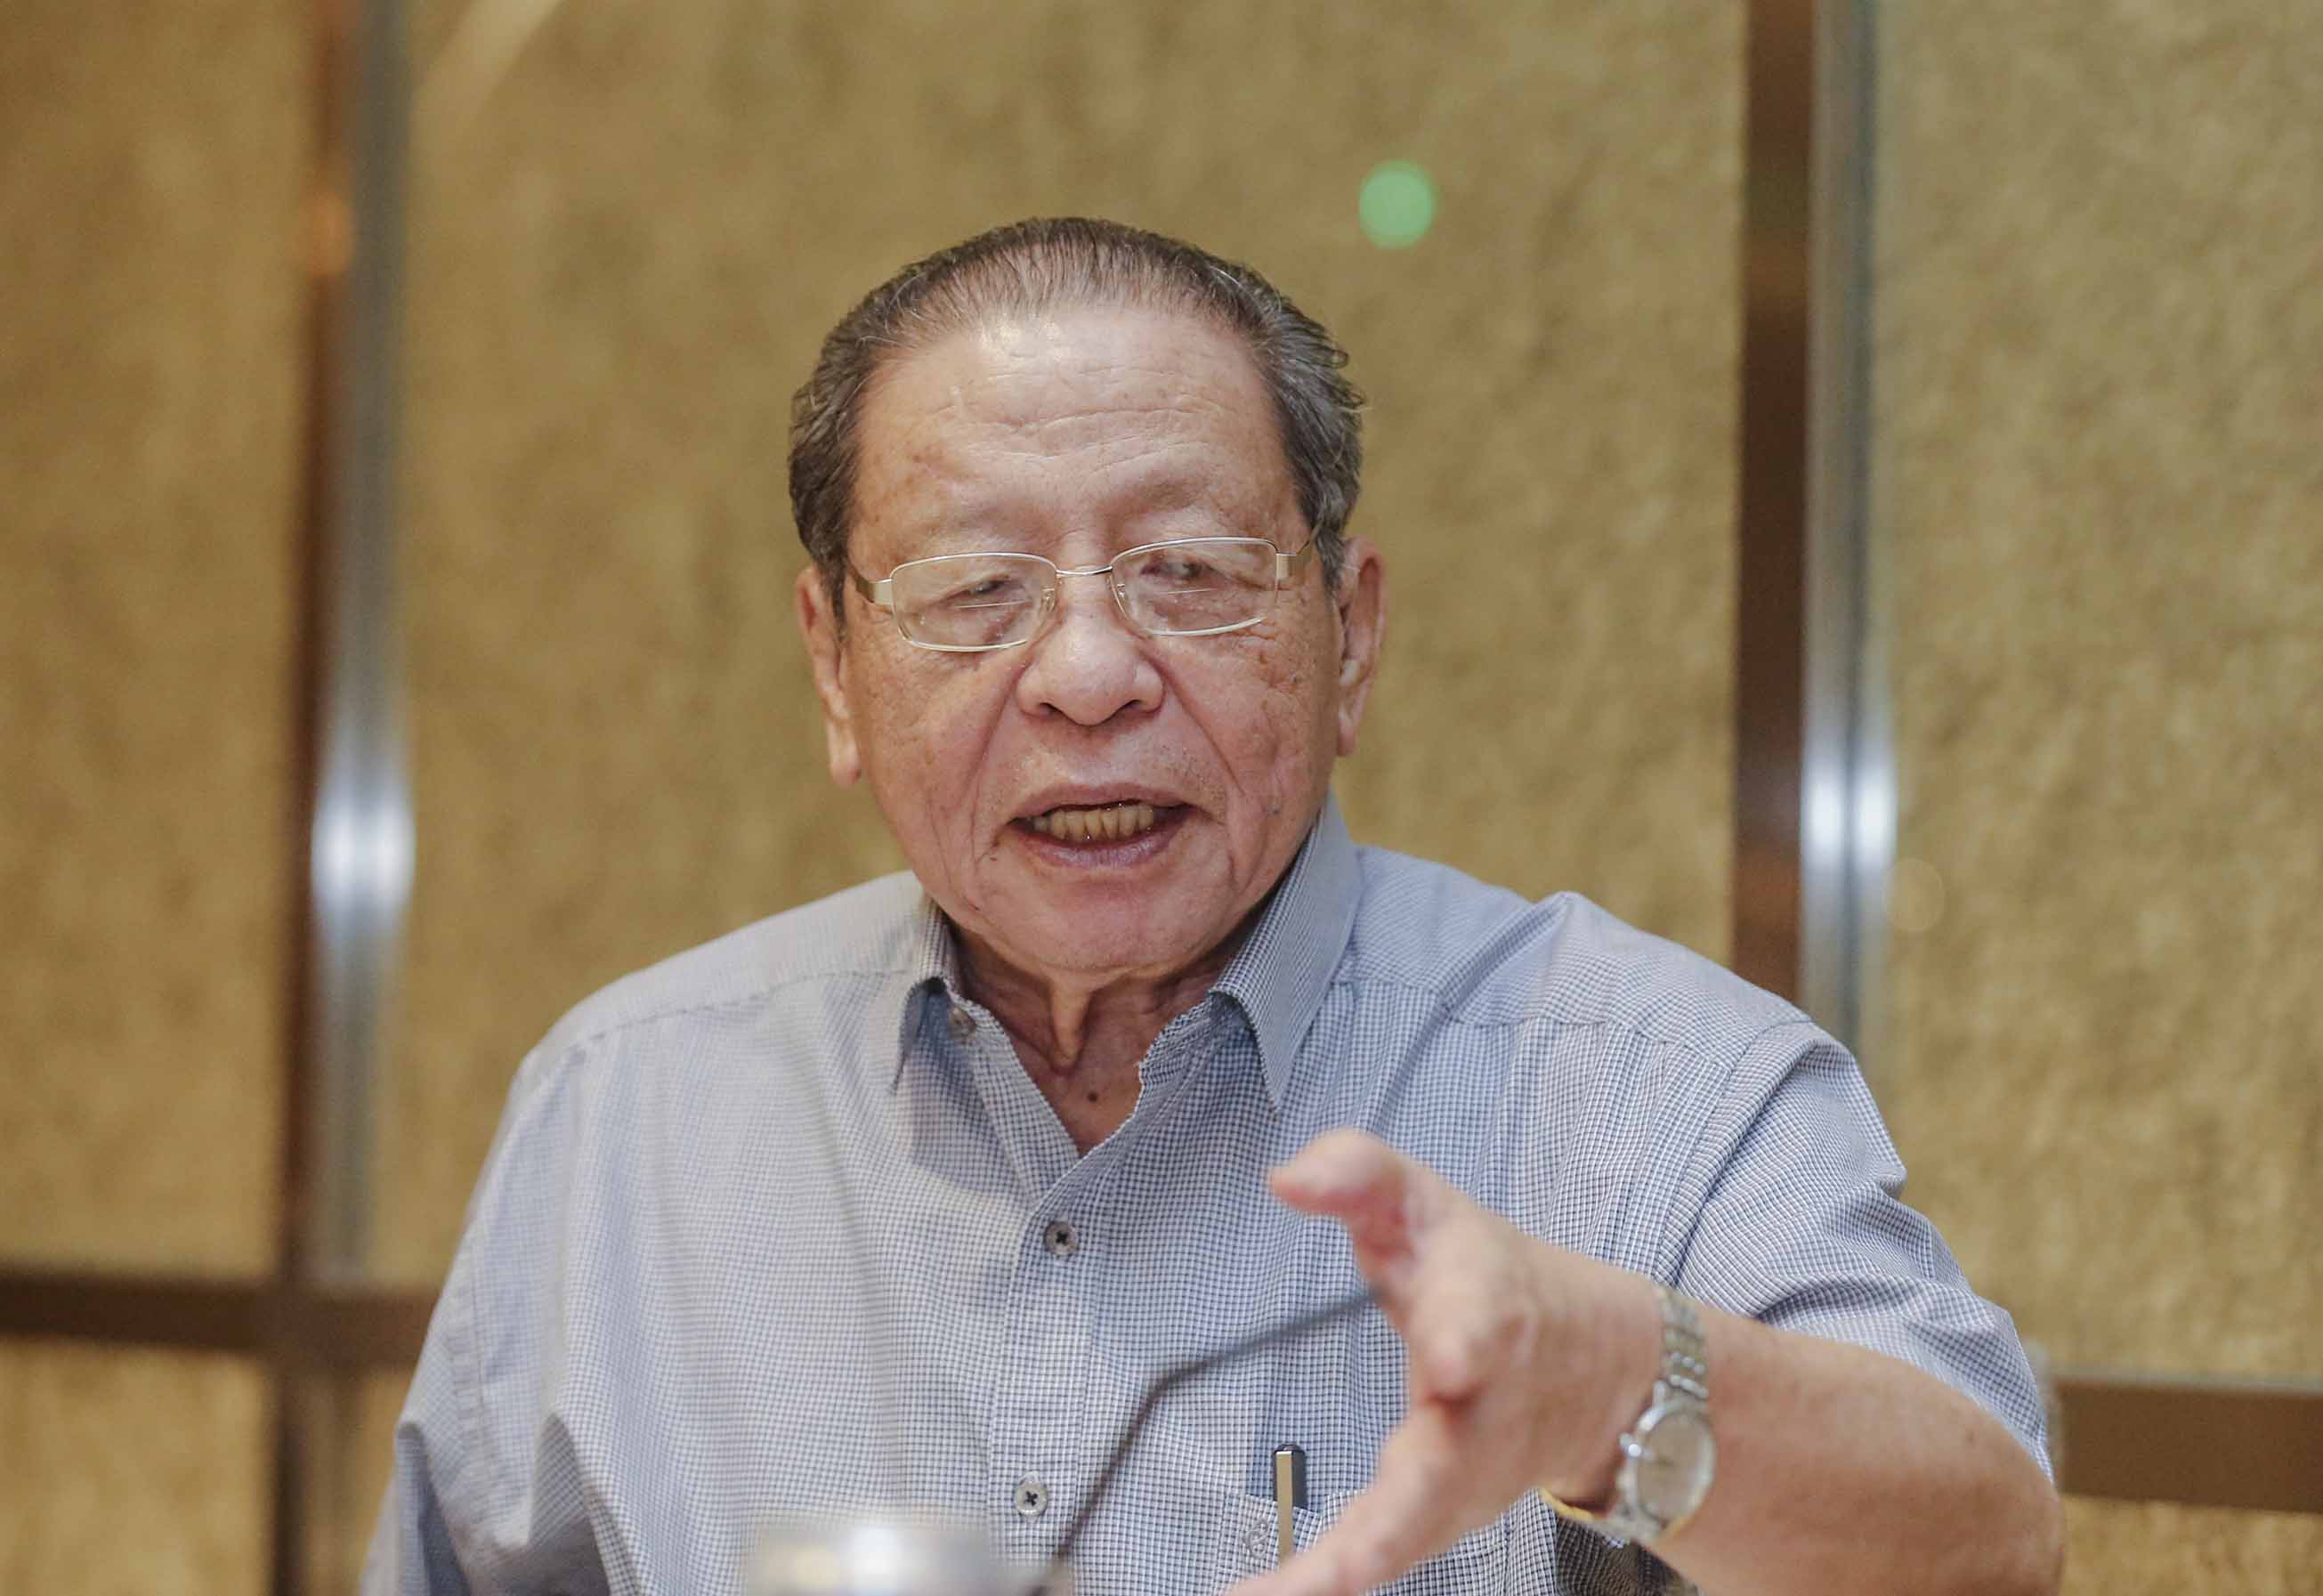 DAP’s Lim Kit Siang said 60 Orang Asli motorcyclists for Cameron Highlands Nomination Day were paid RM20 per head. — Picture by Firdaus Latif